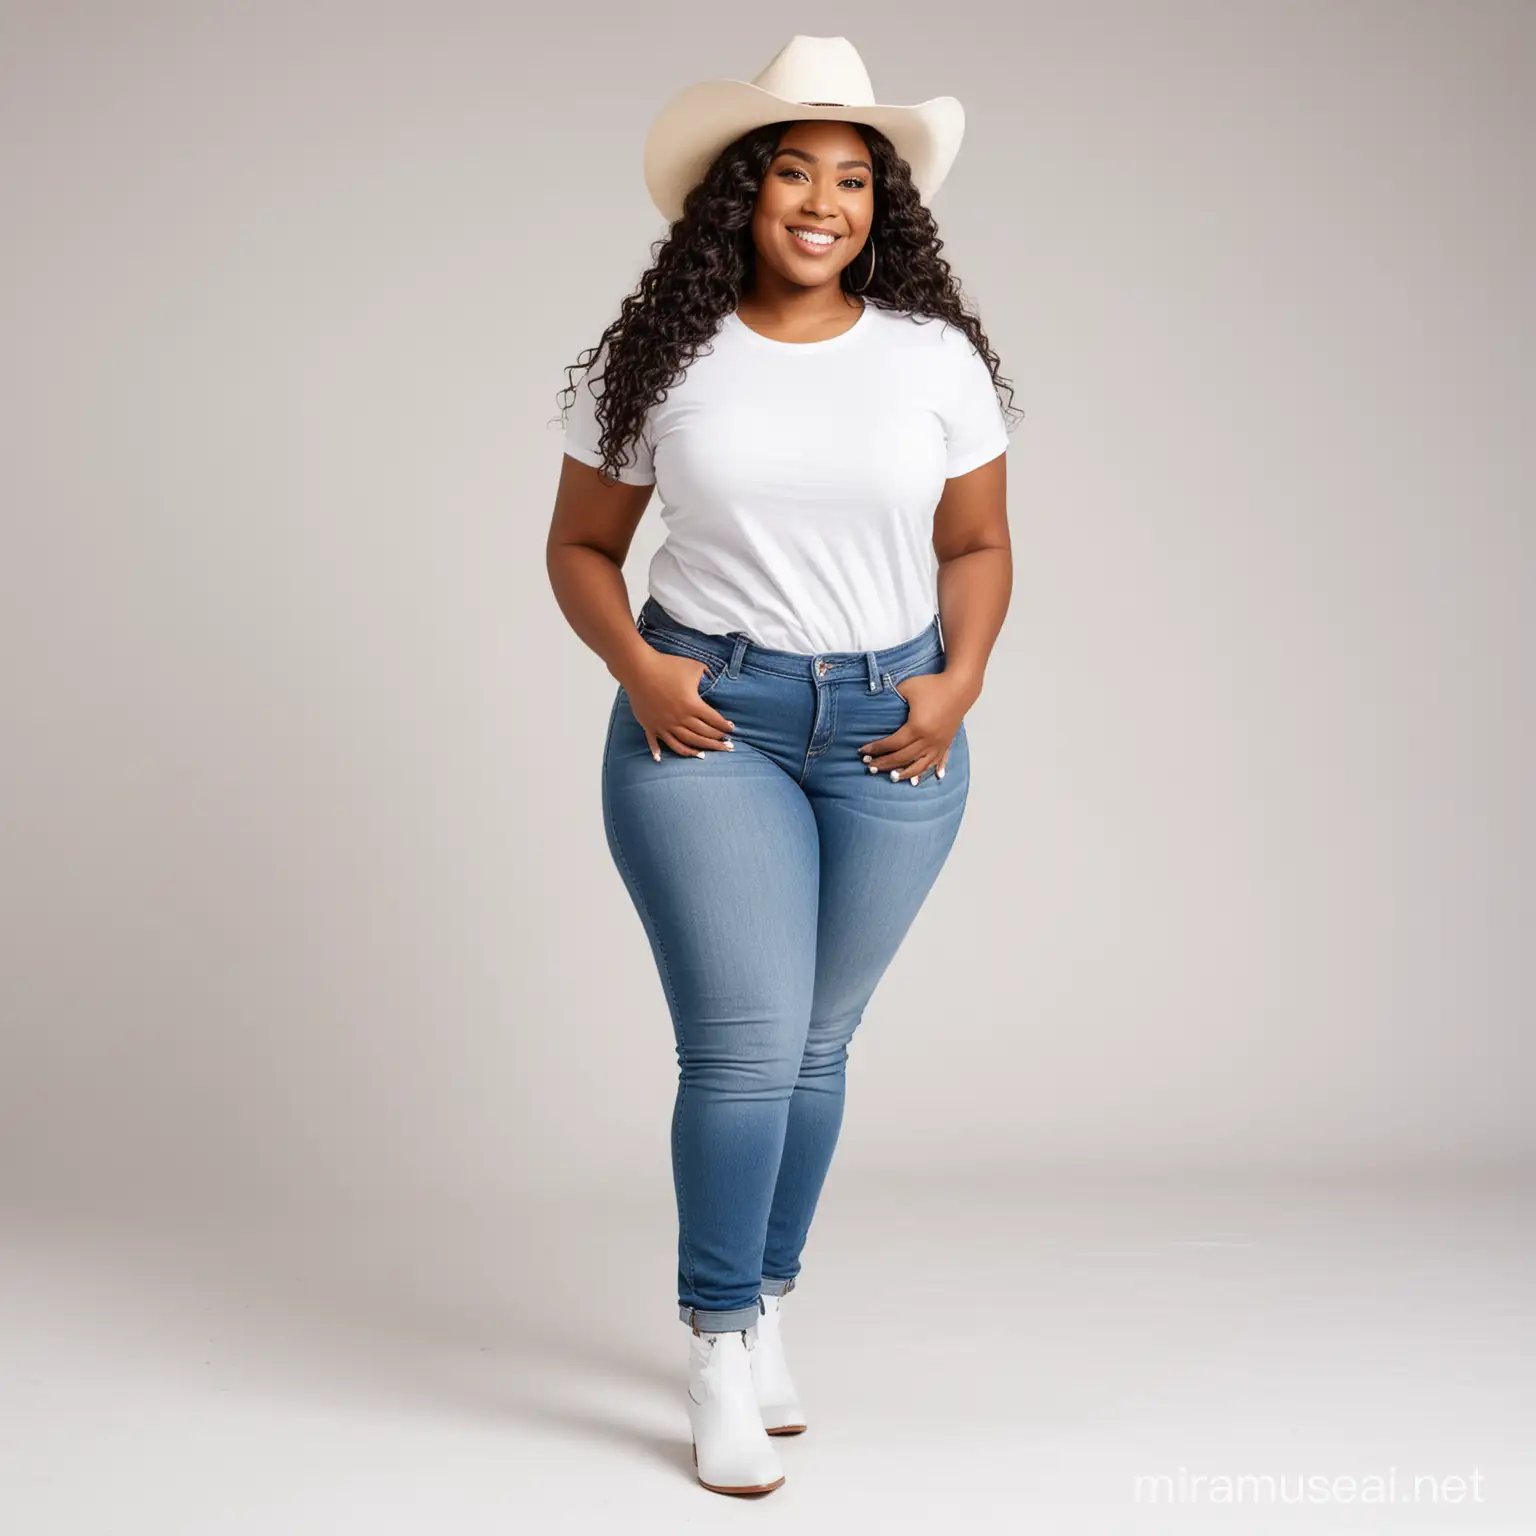 Create a wide-angle mockup view of pretty African American caramel skin woman, plus size, white t-shirt, wearing a white cowboy hat, blue jeans, white cowboy boots, standing and smiling.